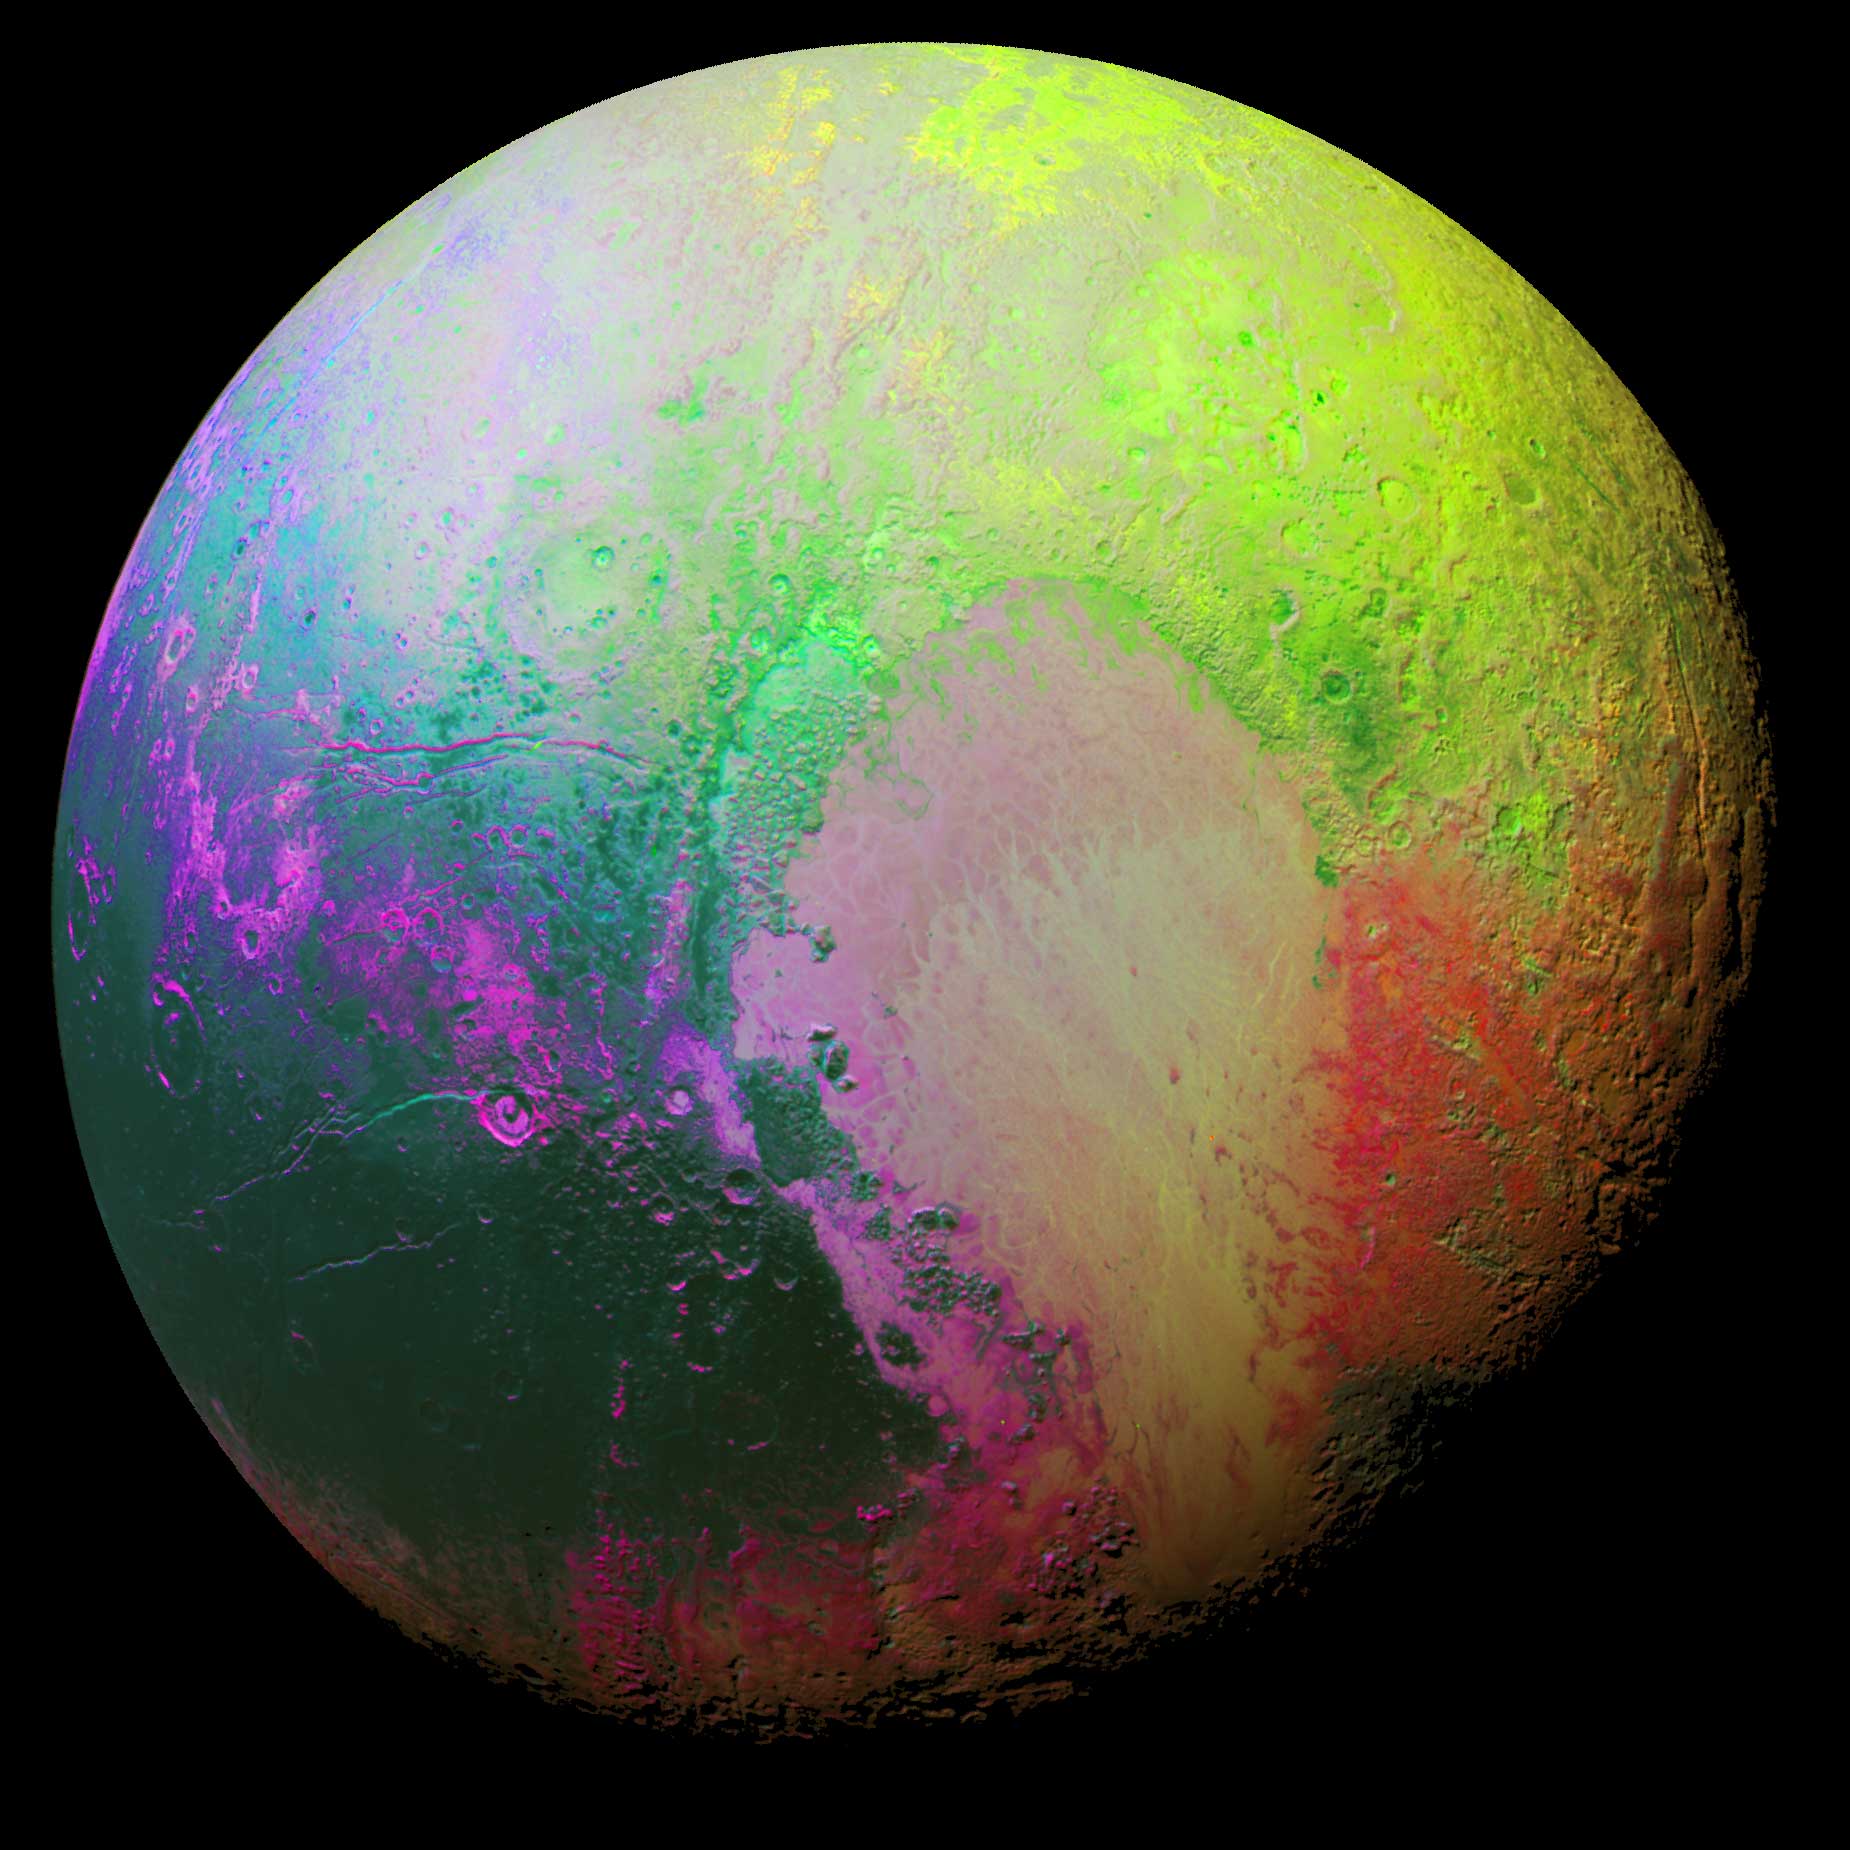 New Horizons scientists made this false color image of Pluto using a technique called principal component analysis to highlight the many subtle color differences between Pluto's distinct regions. The image data were collected by the spacecraft’s Ralph/MVIC color camera on July 14 at 11:11 AM UTC, from a range of 22,000 miles (35,000 kilometers). This image was presented by Will Grundy of the New Horizons’ surface composition team on Nov. 9 at the Division for Planetary Sciences (DPS) meeting of the American Astronomical Society (AAS) in National Harbor, Maryland.Image Credit: NASA/JHUAPL/SwRILast Updated: Nov. 12, 2015Editor: Tricia Talbert